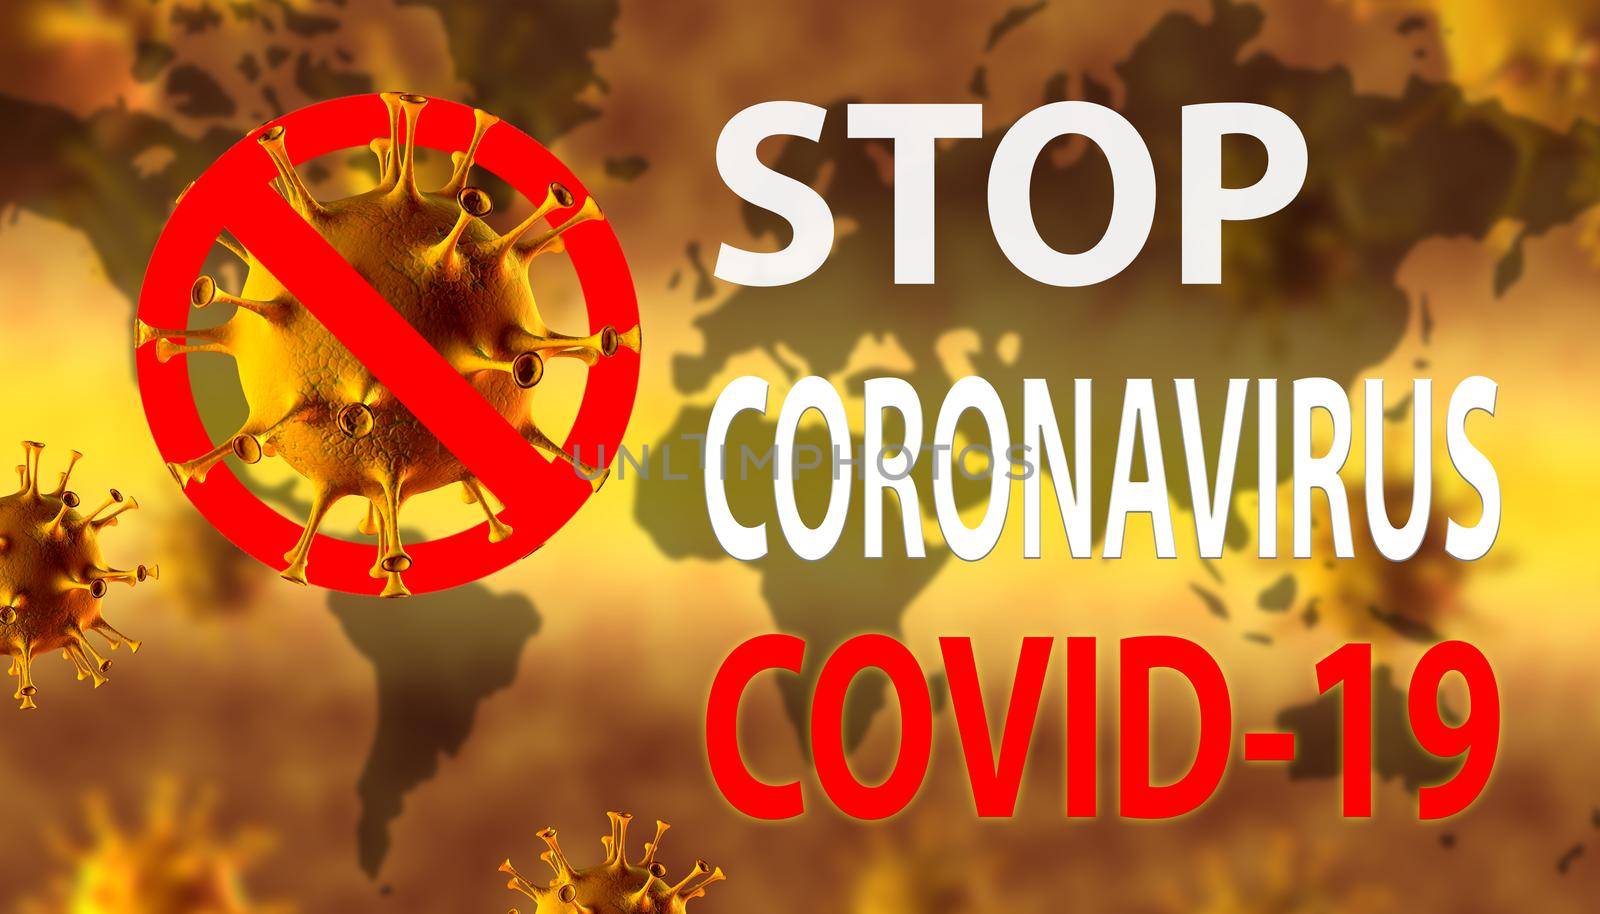 Stop Covid-19 Sign by MilanMarkovic78